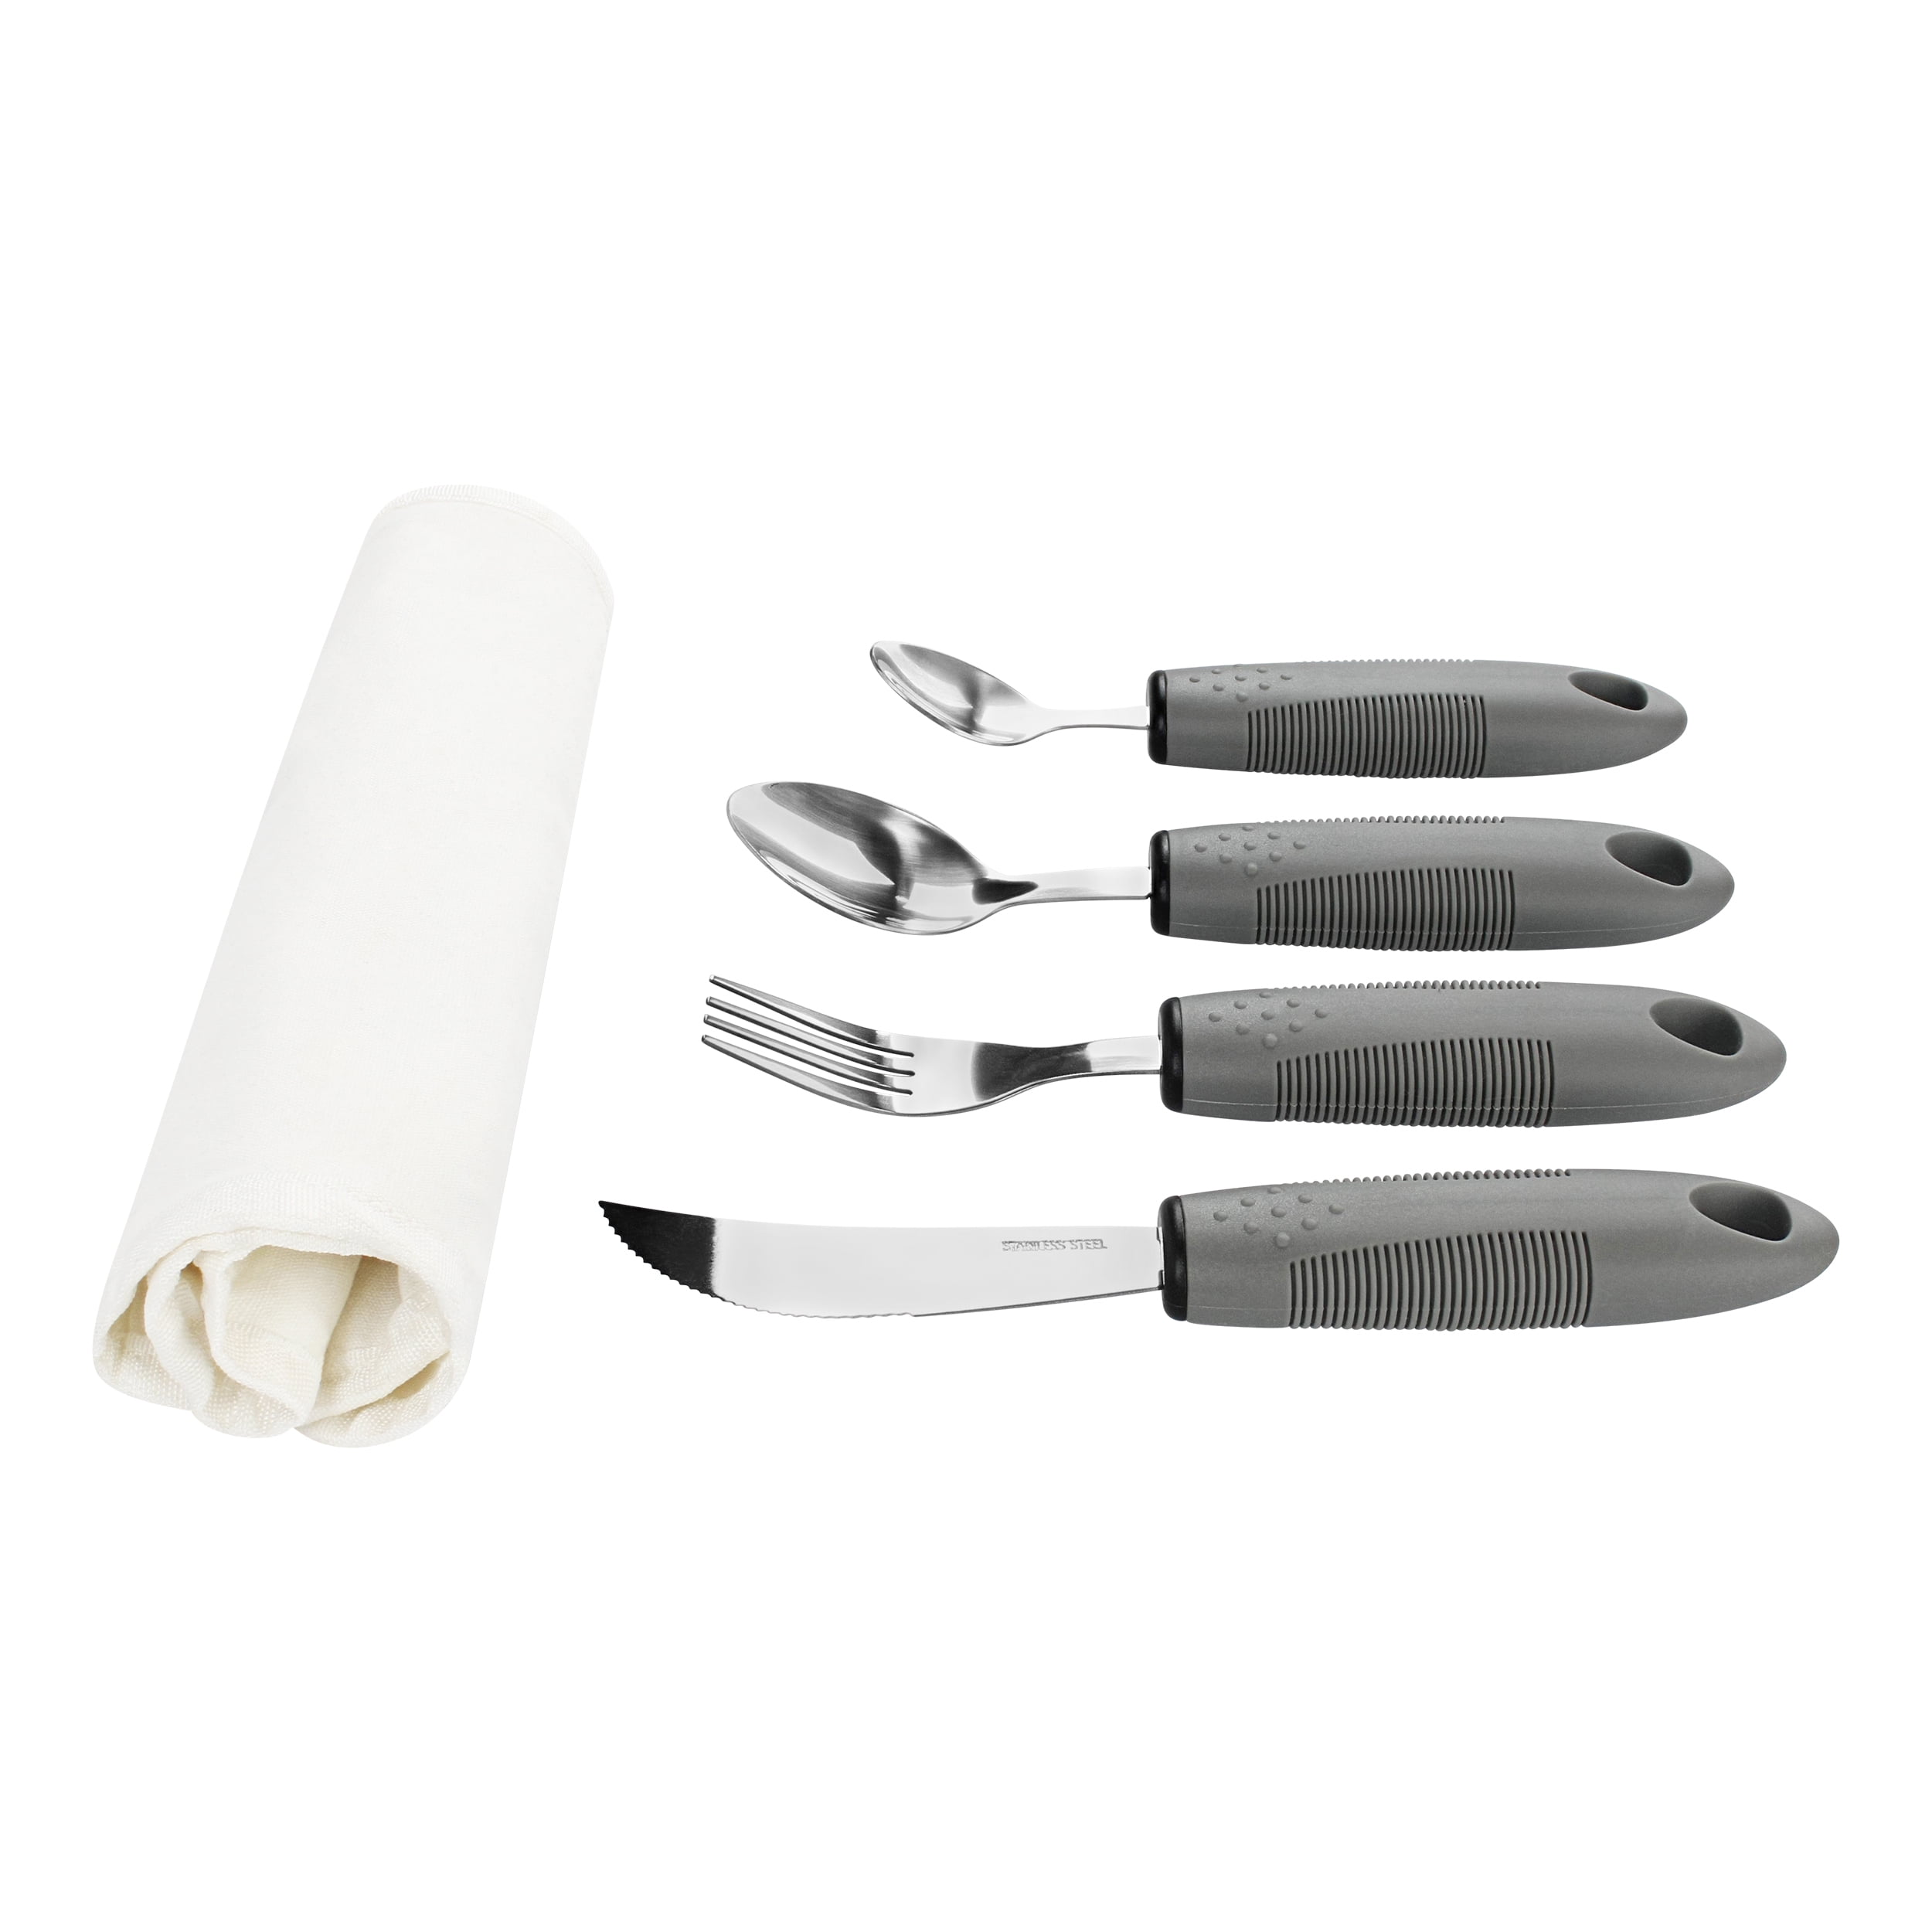 PKPKAUT Weighted Parkinsons Utensils for Hand Tremors, Weighted Silverware  for Parkinsons Patients Arthritic Hands, Built Up Utensils for Adults